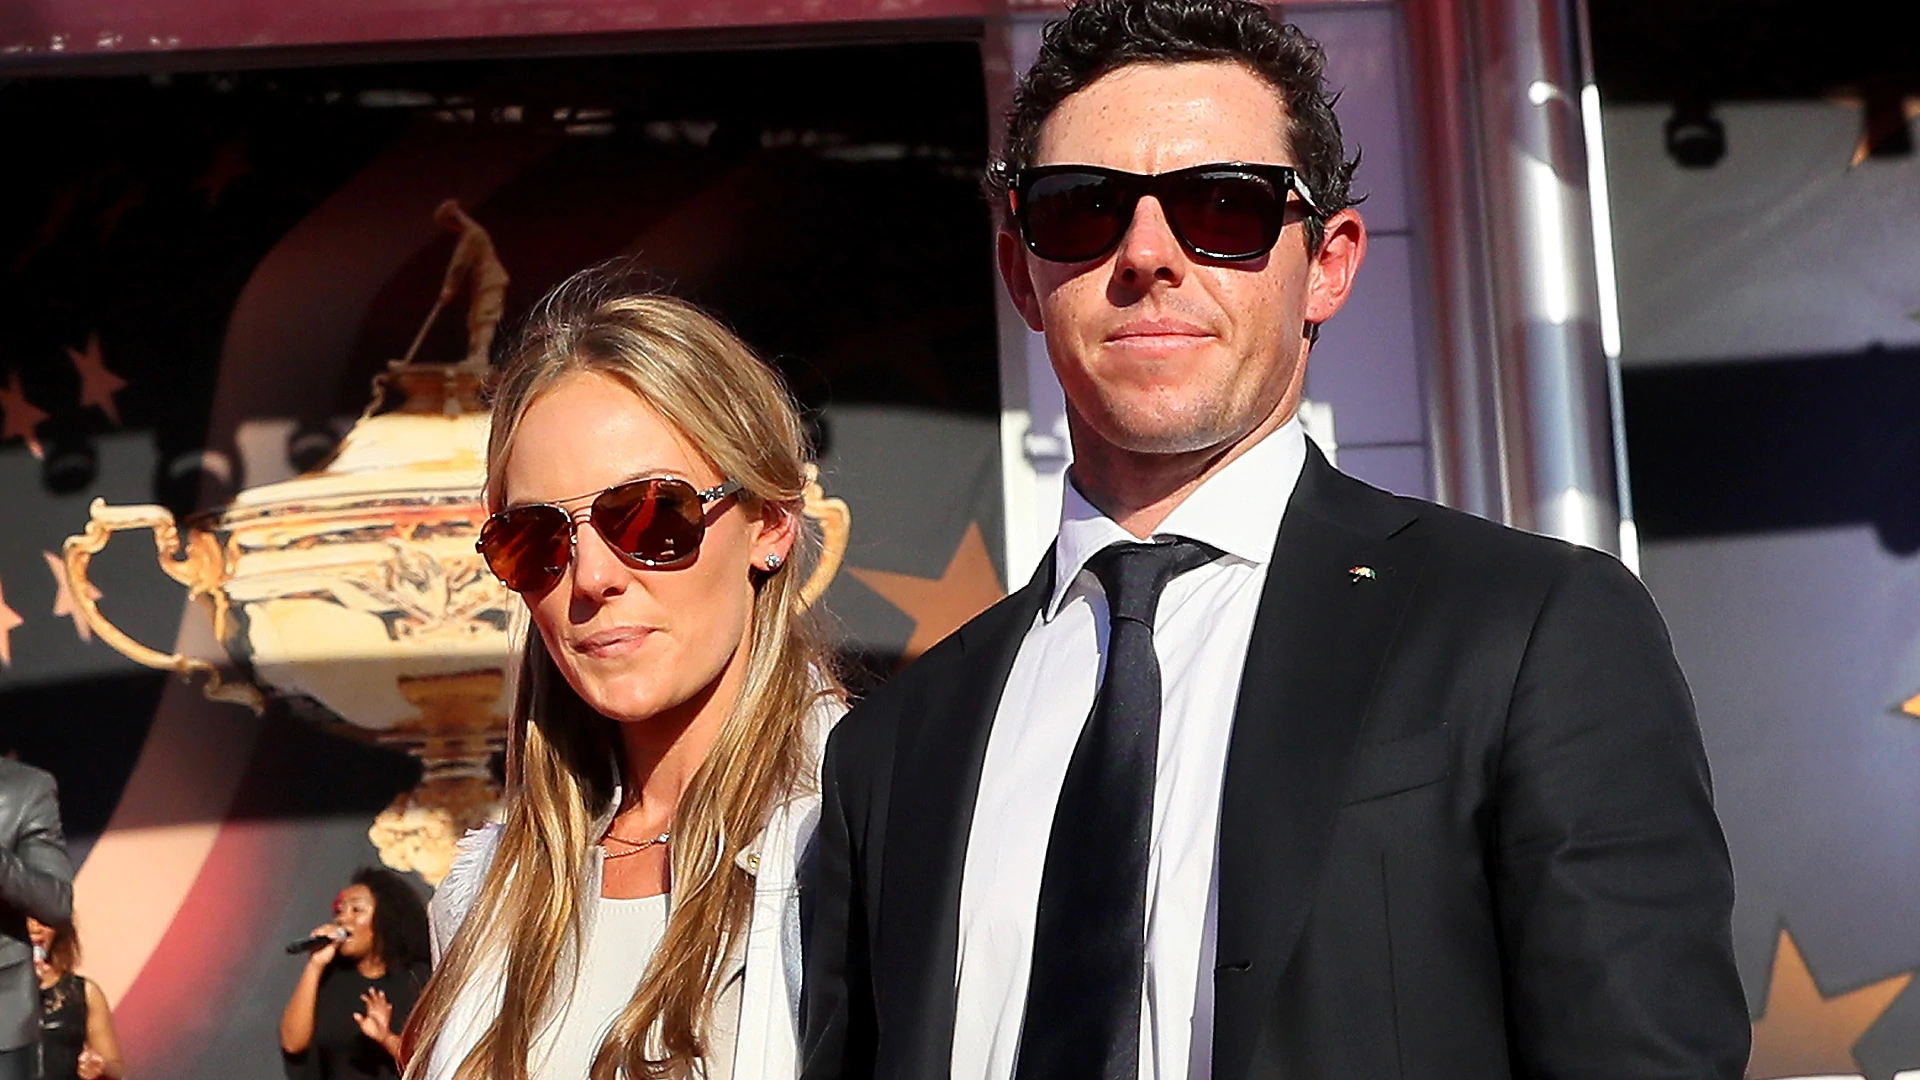 McIlroy hands Twitter to wife after Elkington spat